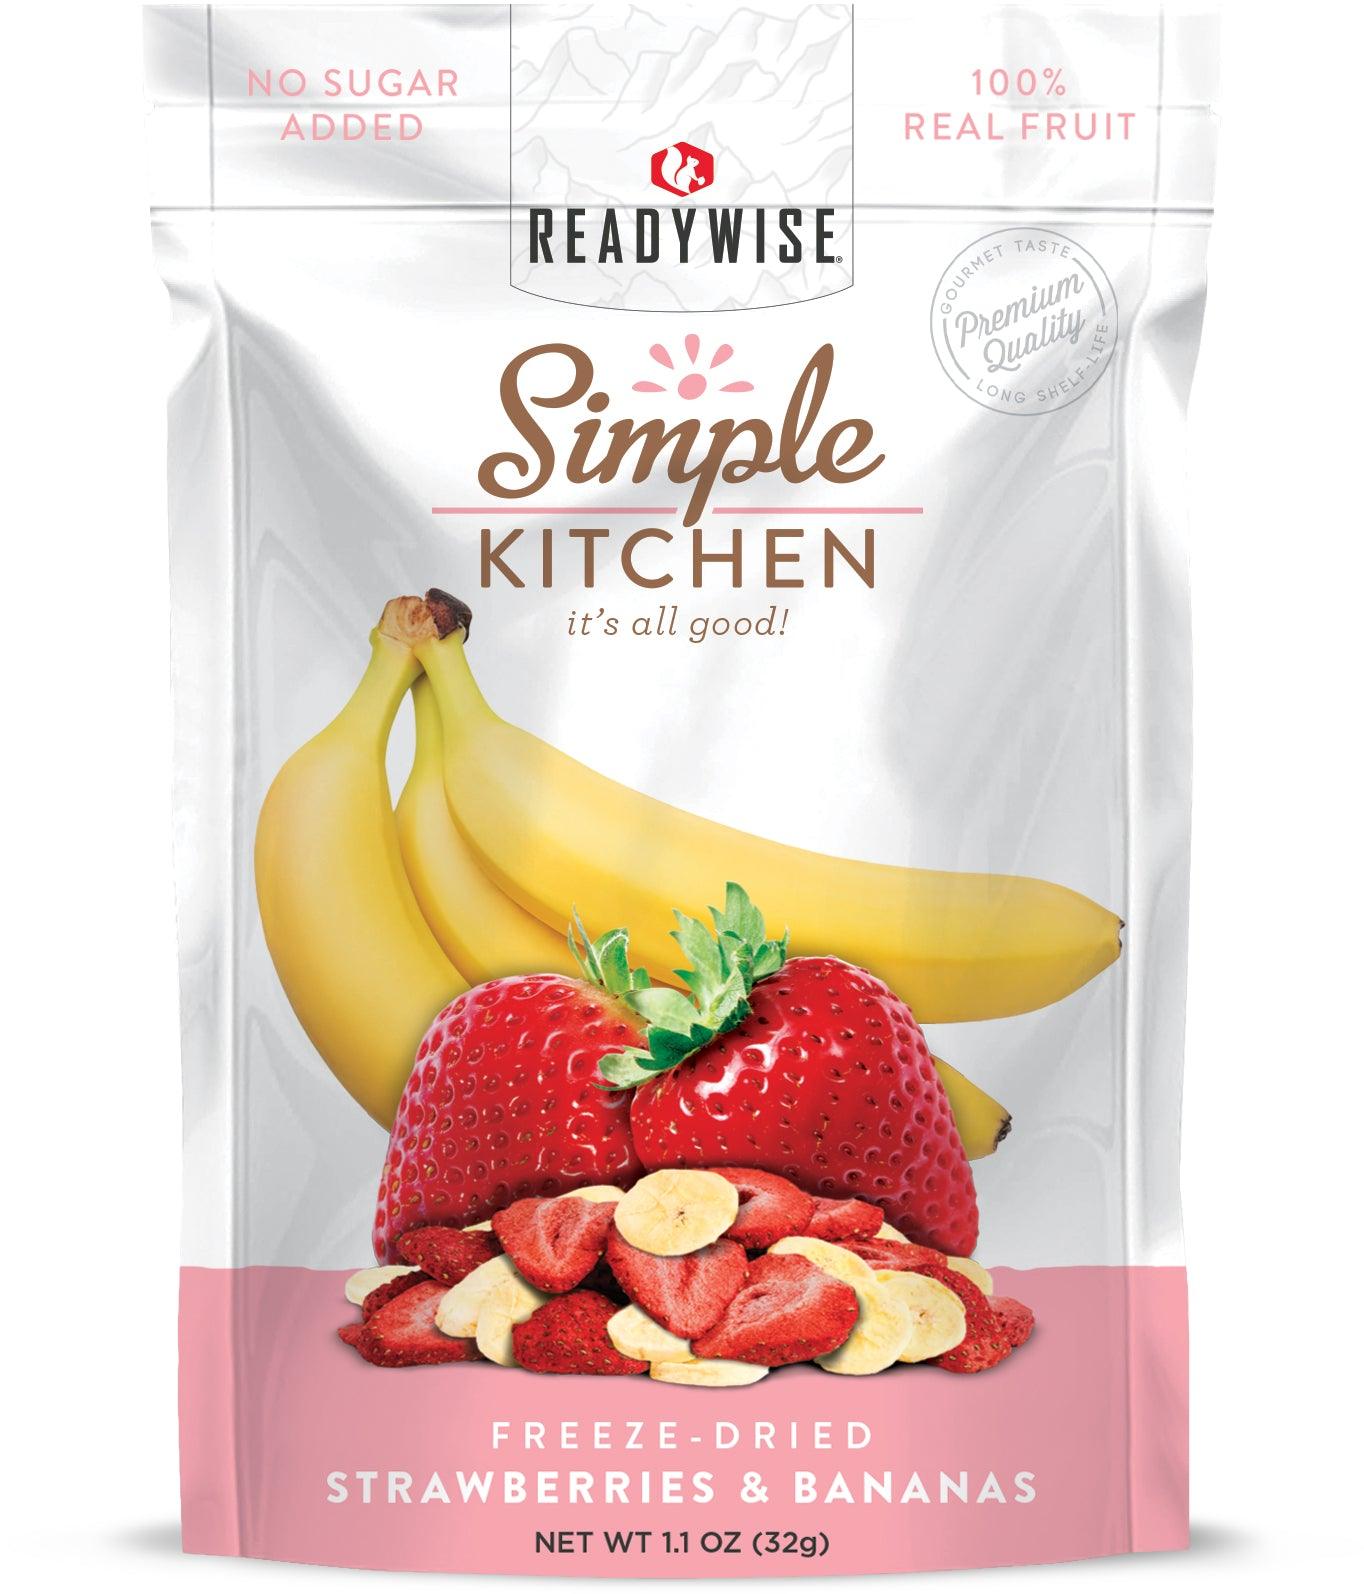 delcious-and-nutritious-freeze-dried-strawberries-and-bananas-SimpleKitchen